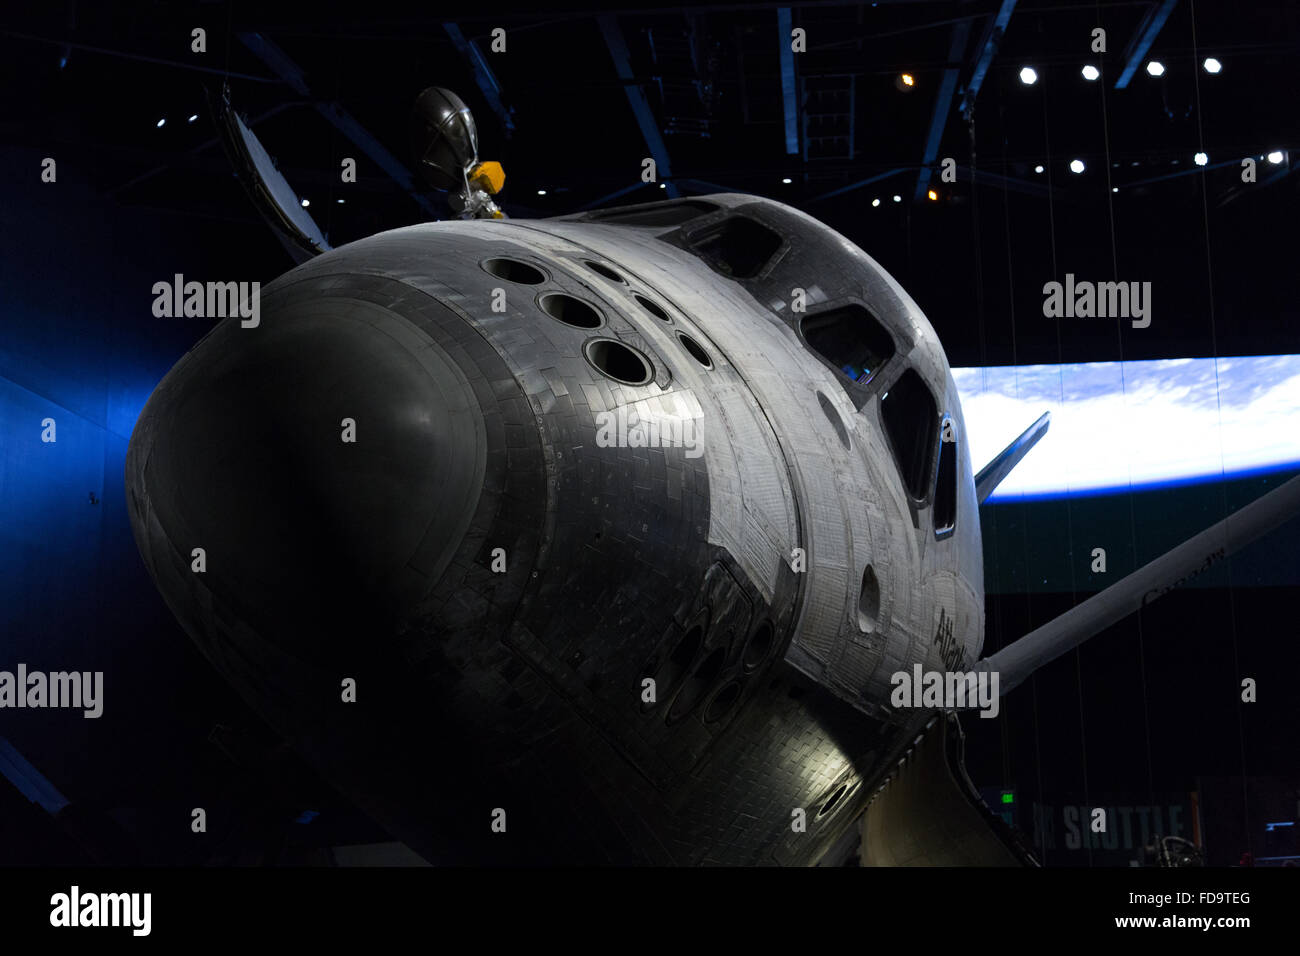 Ein Foto des Space Shuttle Atlantis am Kennedy Space Center (KSC) Visitor Complex in Cape Canaveral in Florida, USA. Stockfoto